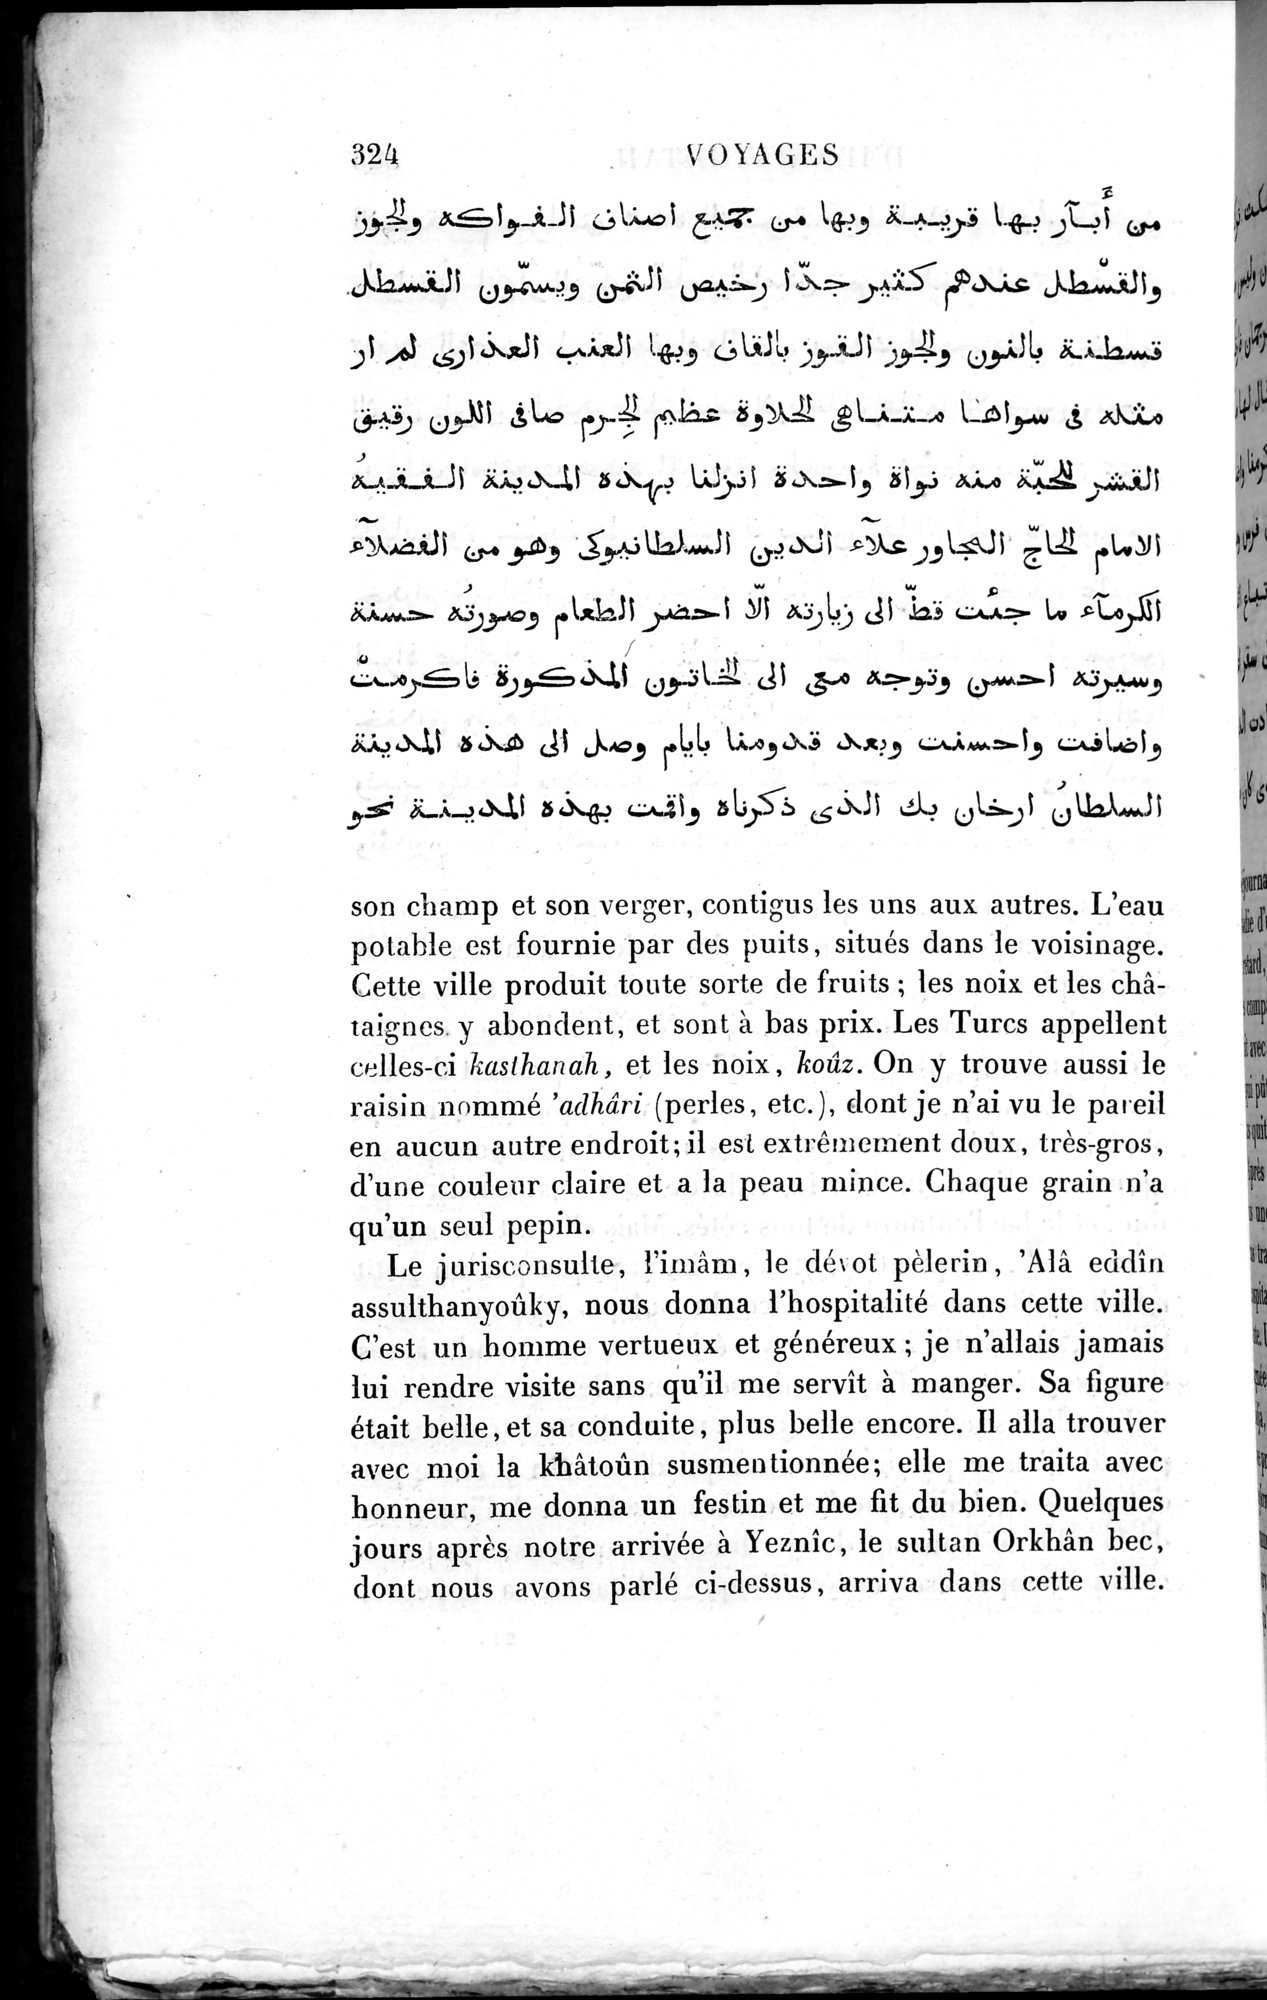 Voyages d'Ibn Batoutah : vol.2 / Page 352 (Grayscale High Resolution Image)